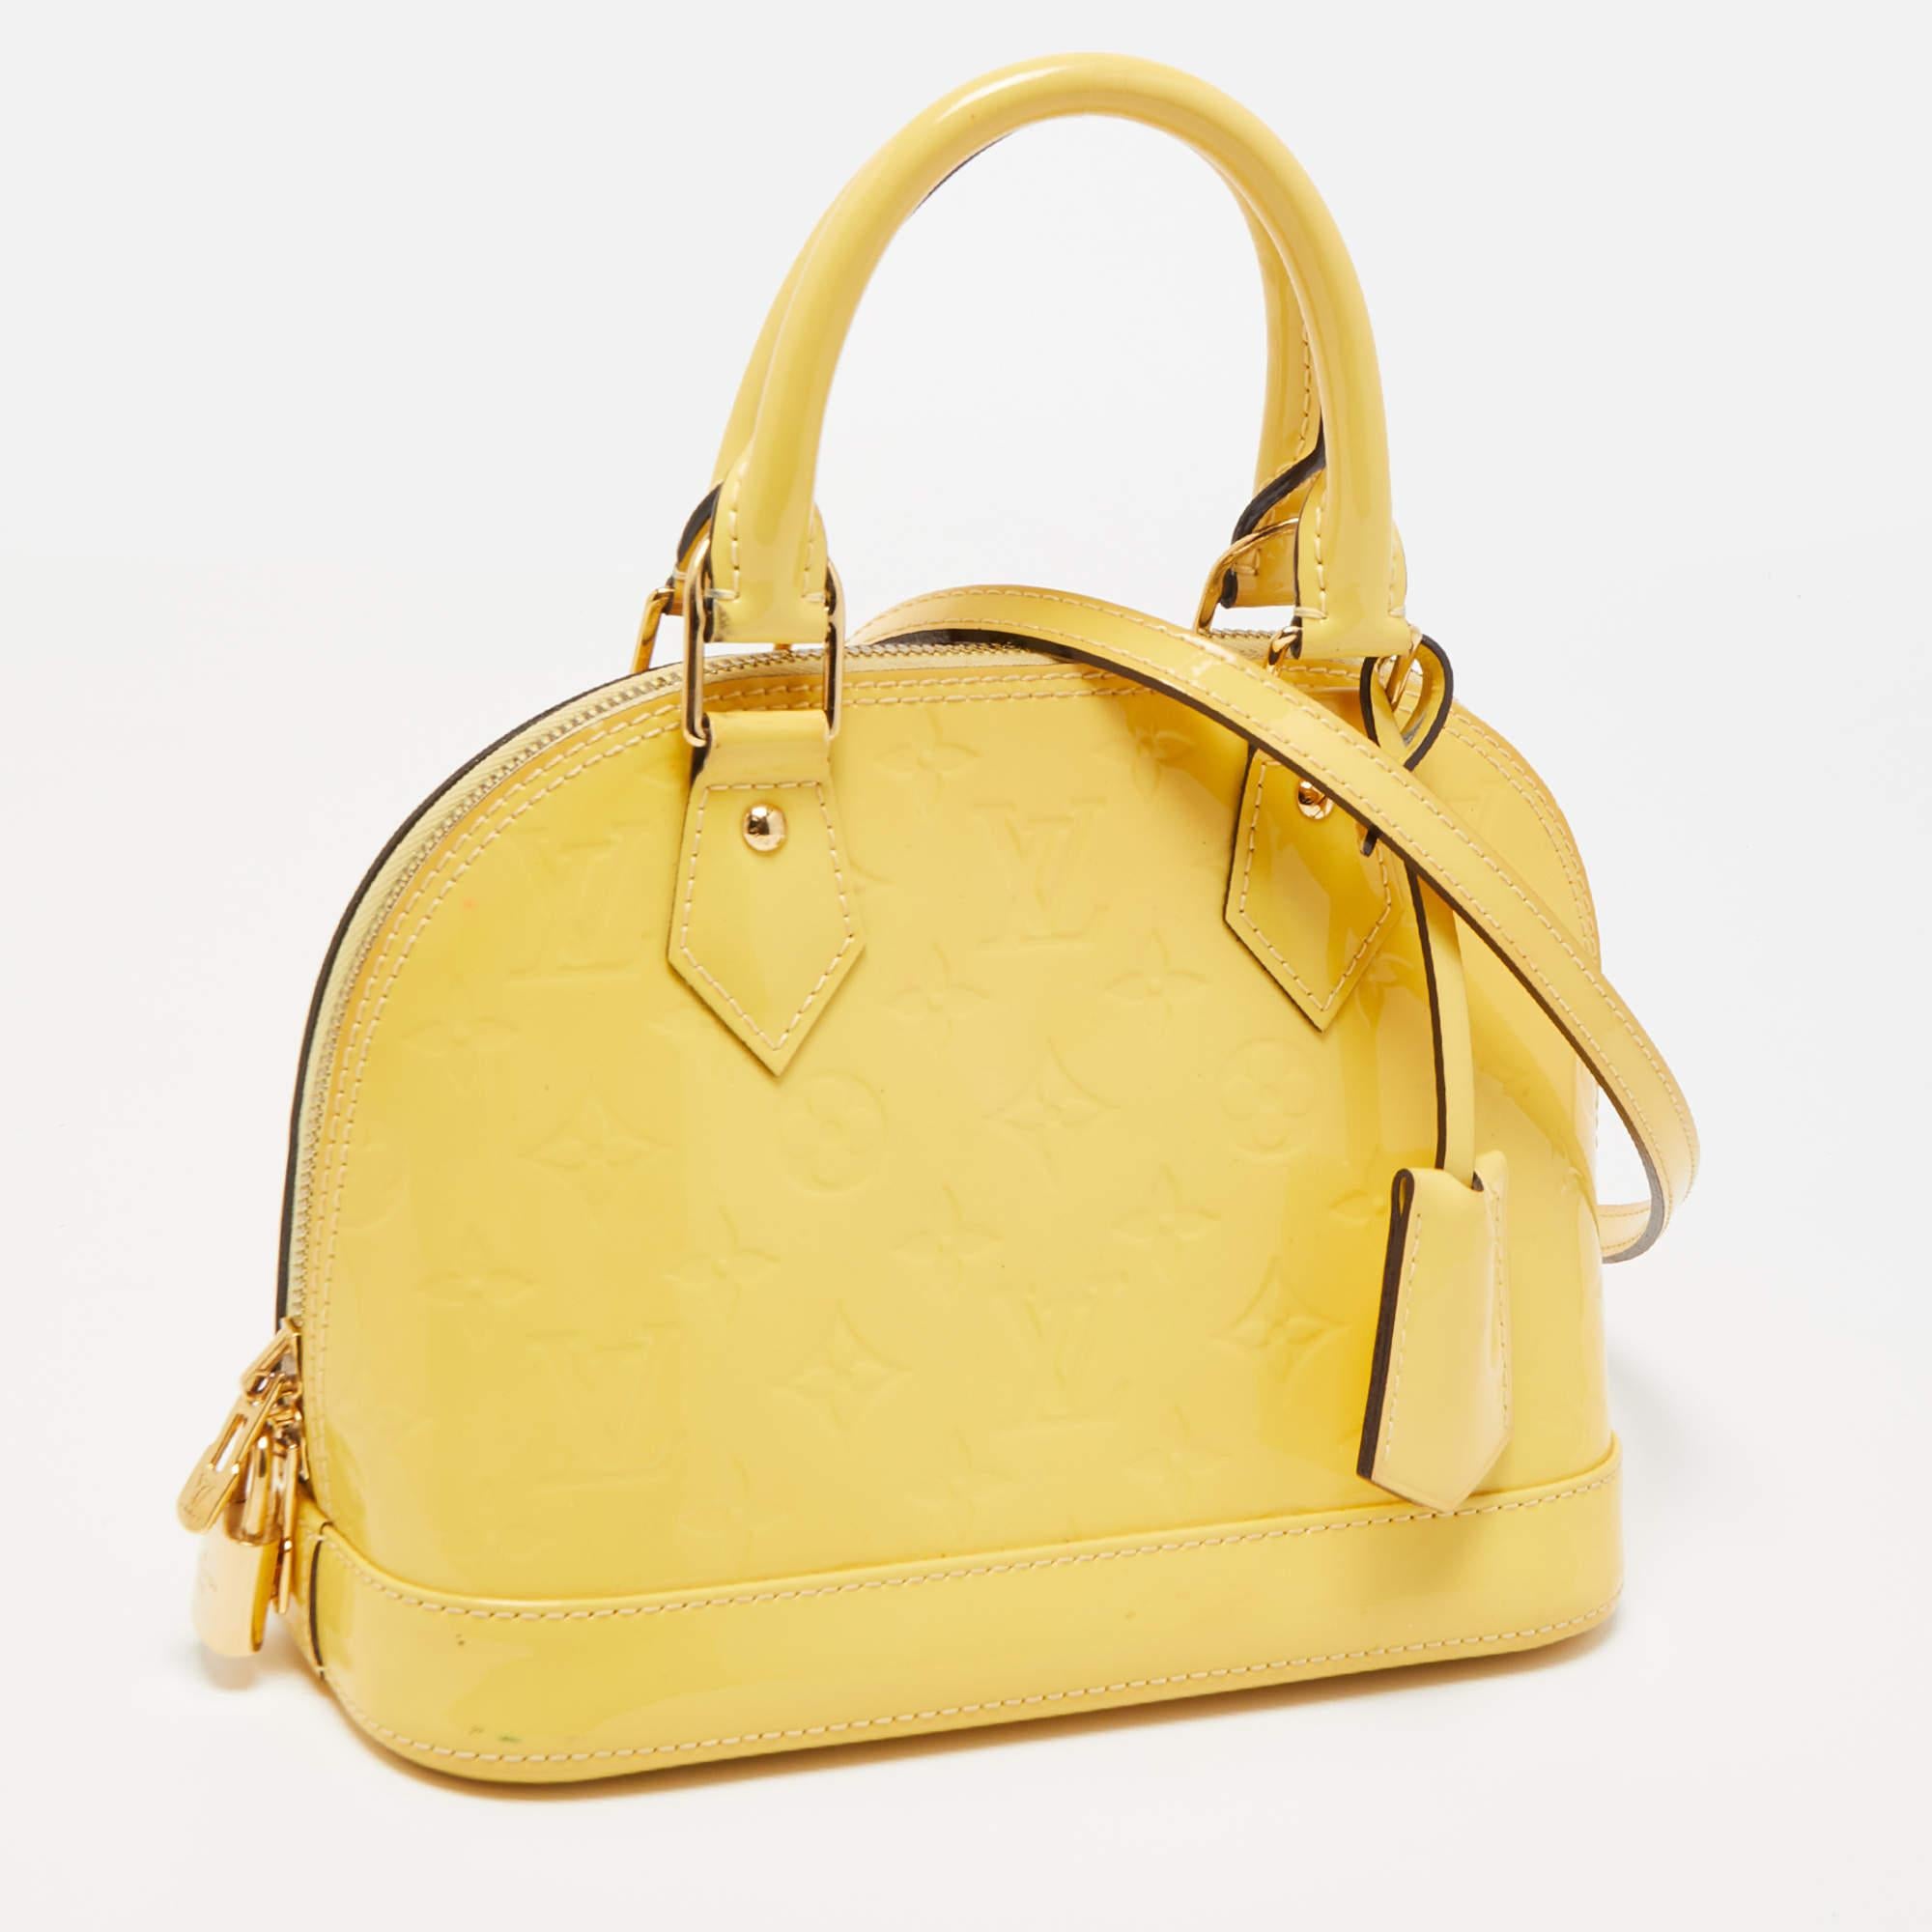 Introduced by Gaston-Louis Vuitton in 1934, the Louis Vuitton Alma is defined by elegant curves and notable features. From one of the most iconic collections of Louis Vuitton, this BB bag is imbued with exquisite craftsmanship and historic details.